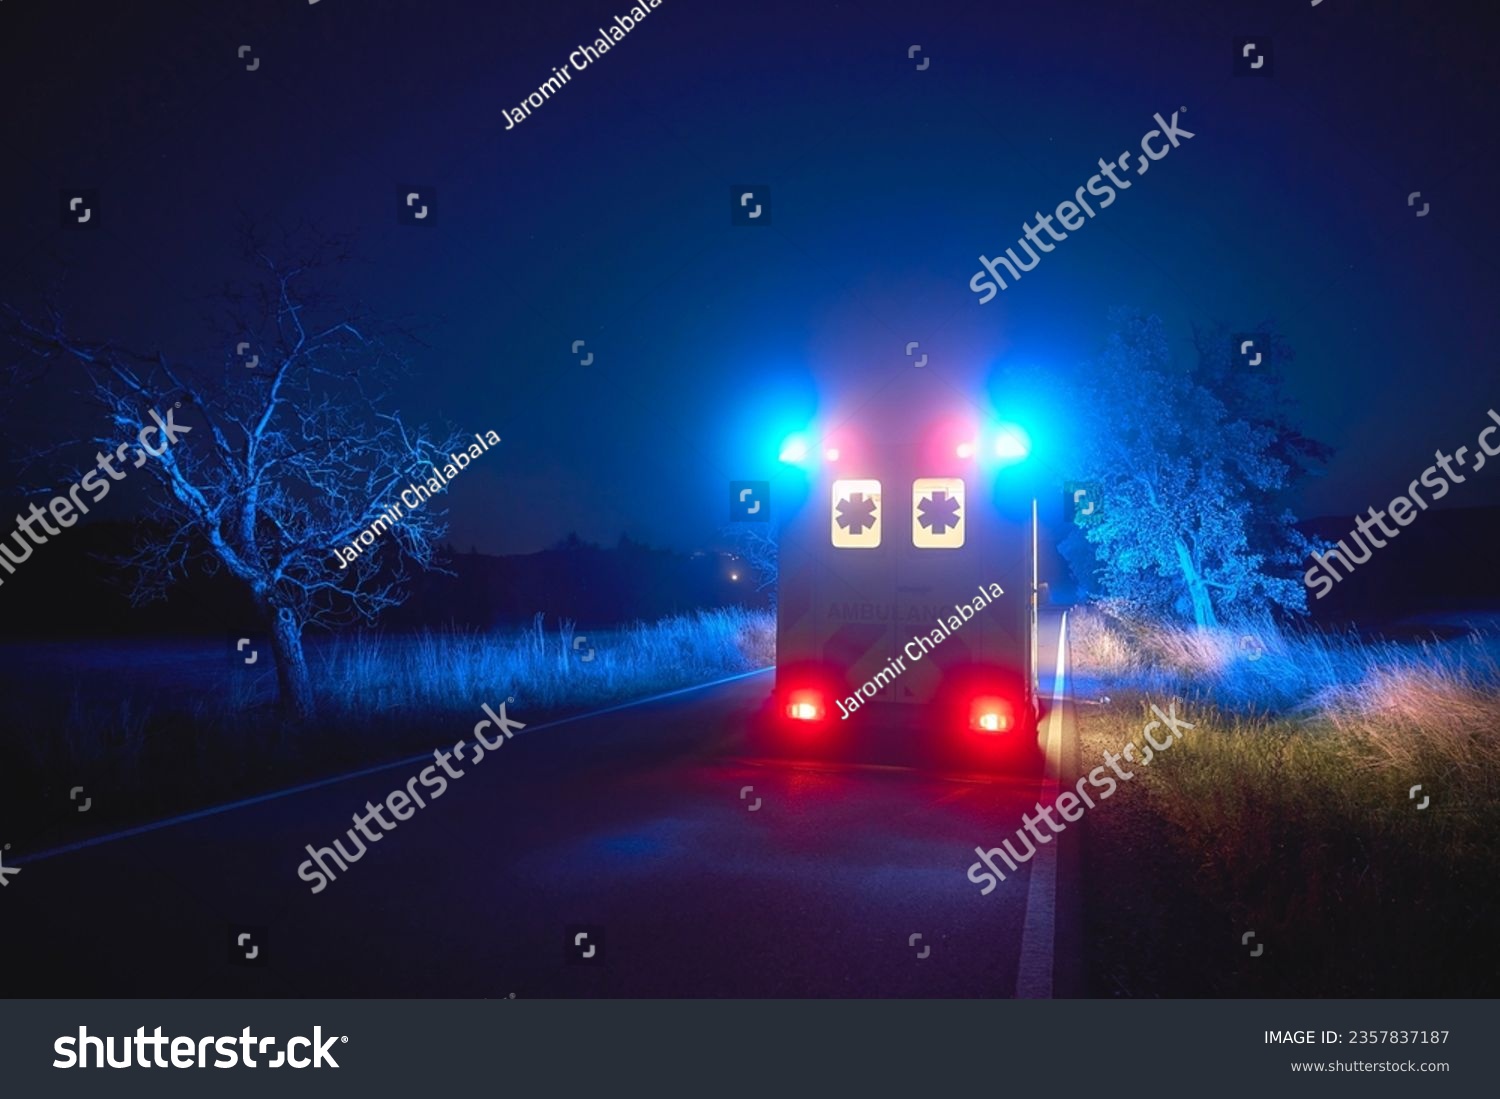 Ambulance car of emergency medical service on road at night. Themes rescue, urgency and health care. 
 #2357837187